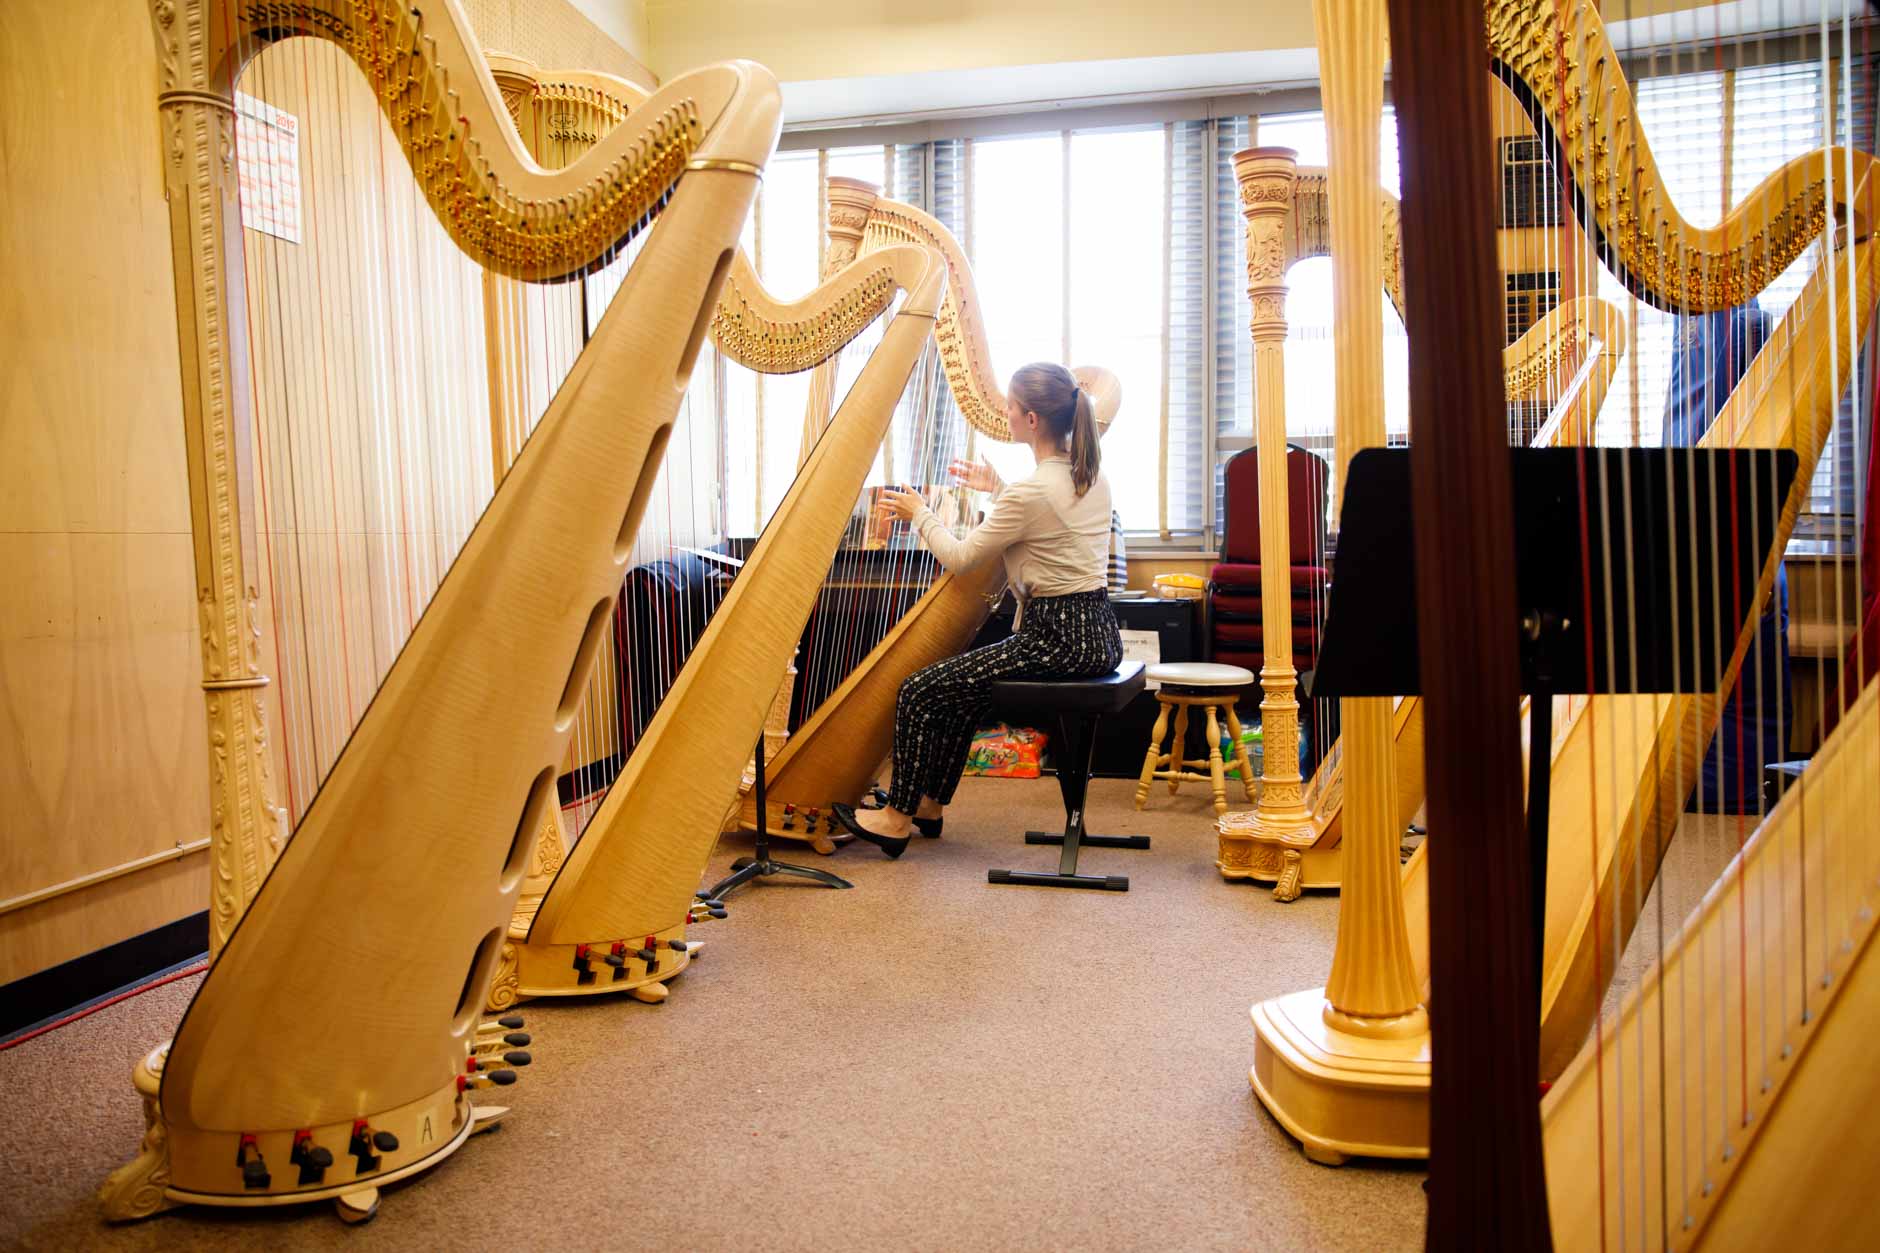 Miriam Ruf of Germany selects a harp during the 11th USA International Harp Competition at Indiana University in Bloomington, Indiana on Tuesday, July 2, 2019. (Photo by James Brosher)